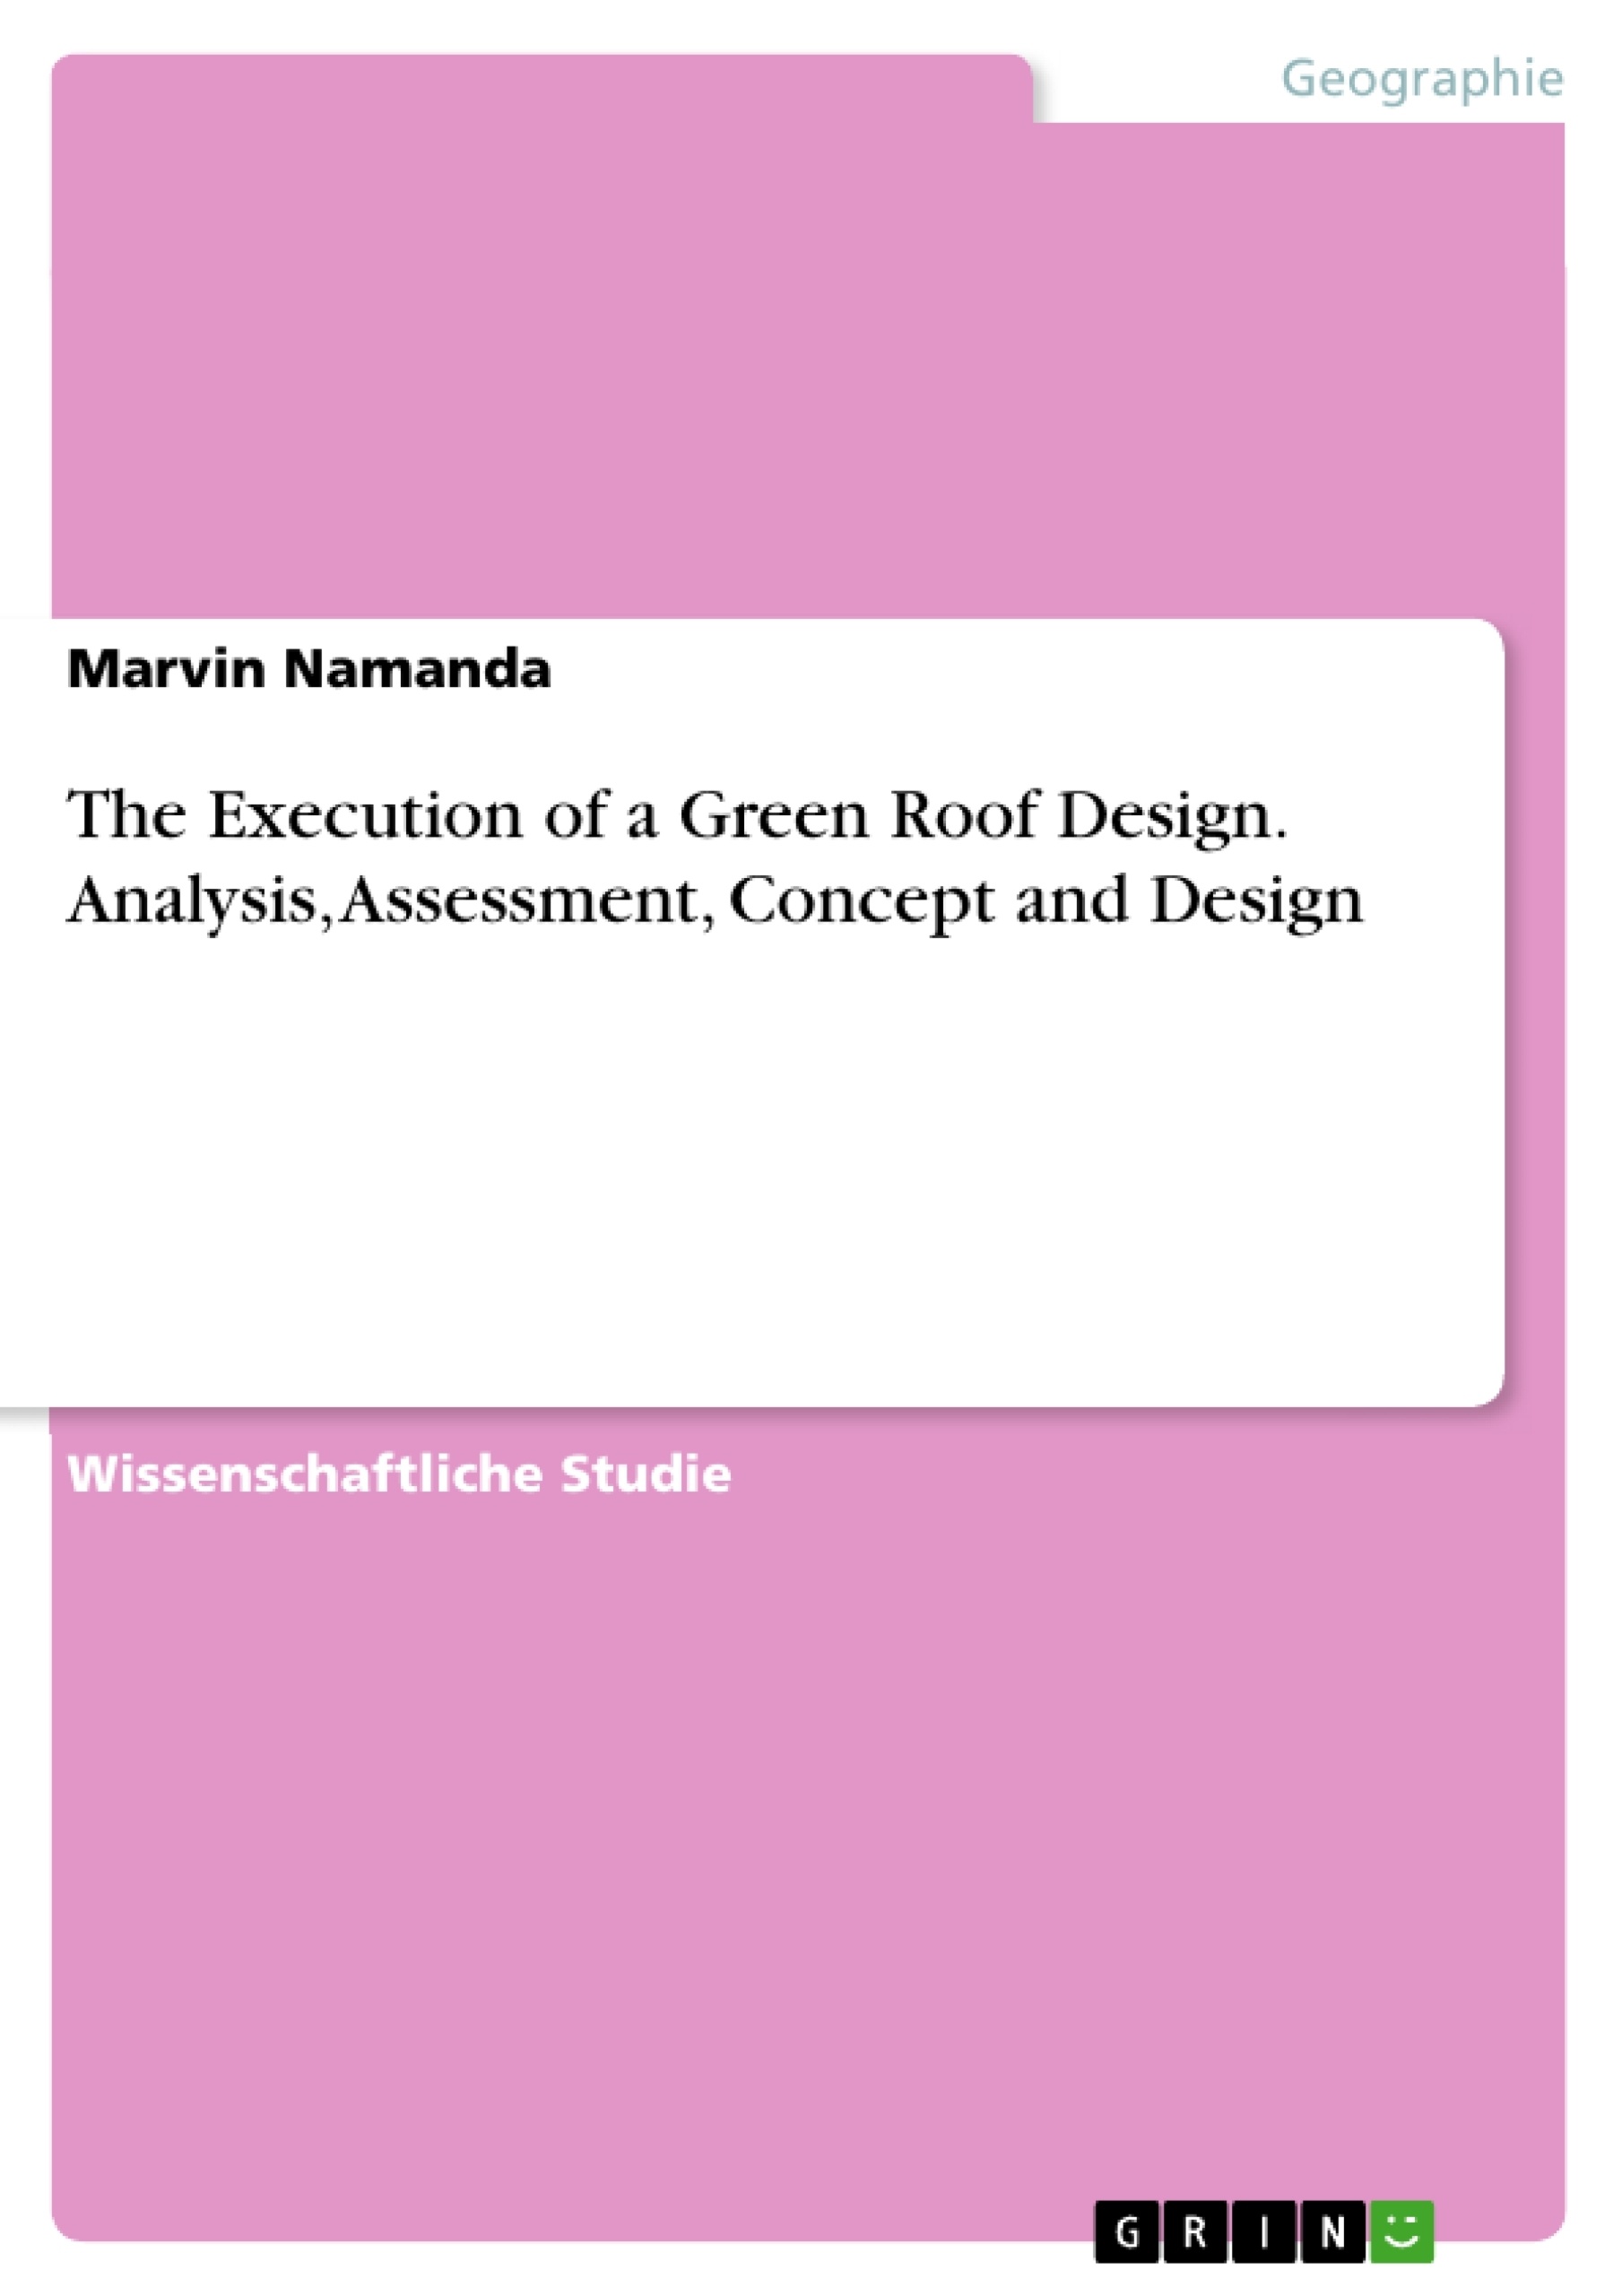 Titel: The Execution of a Green Roof Design. Analysis, Assessment, Concept and Design